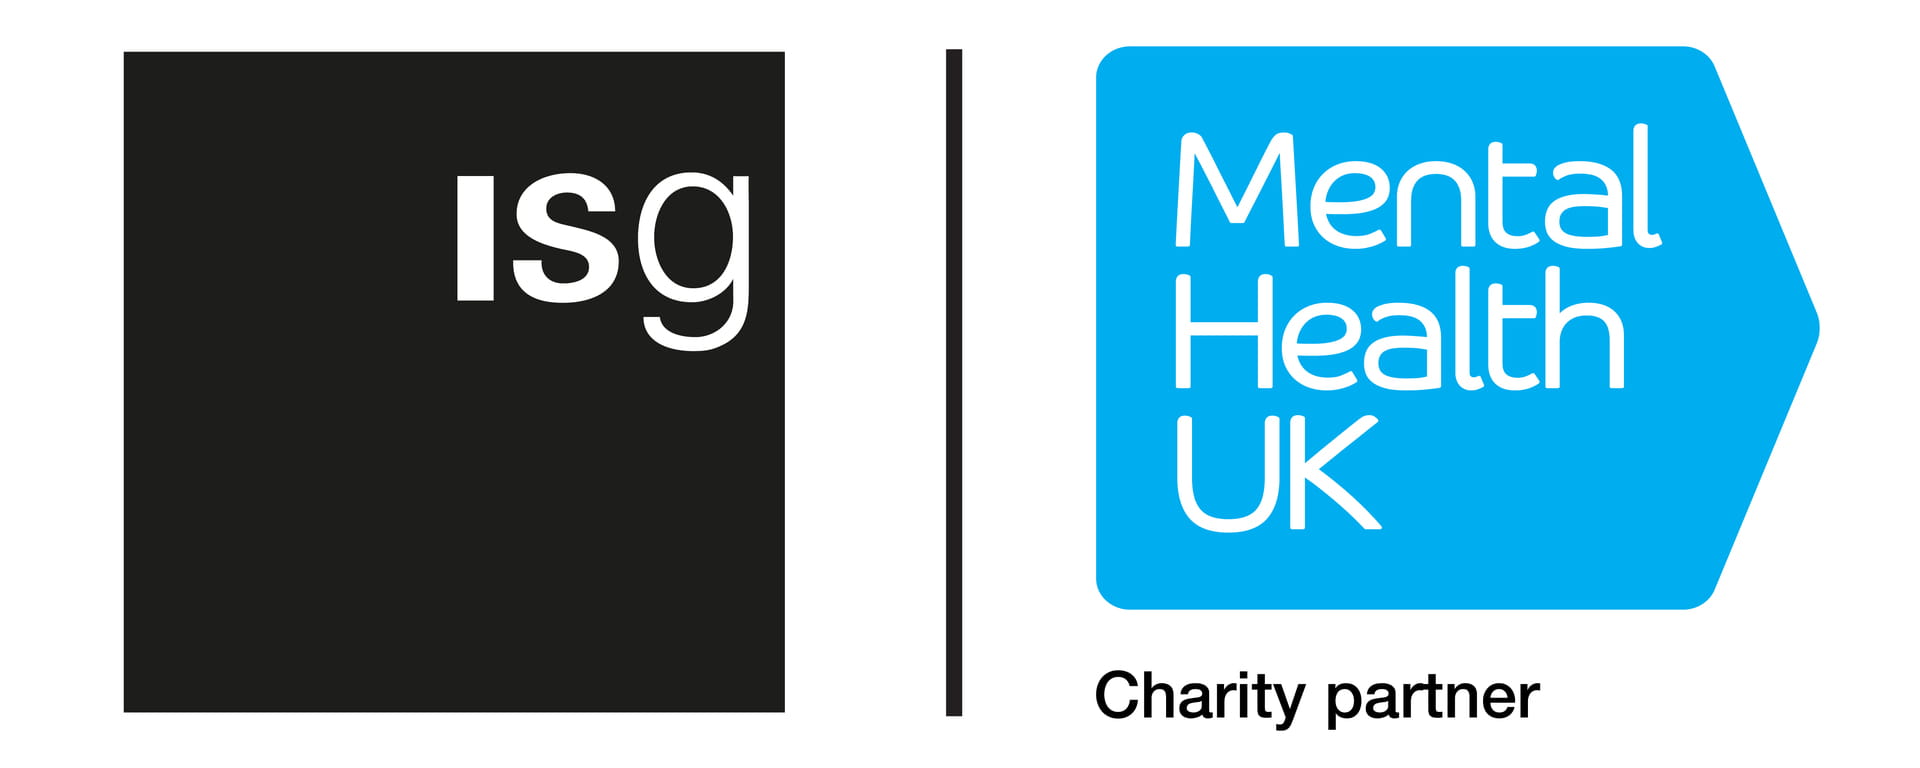 ISG is a charity partner of Mental Health UK - infographic with blue and black logos